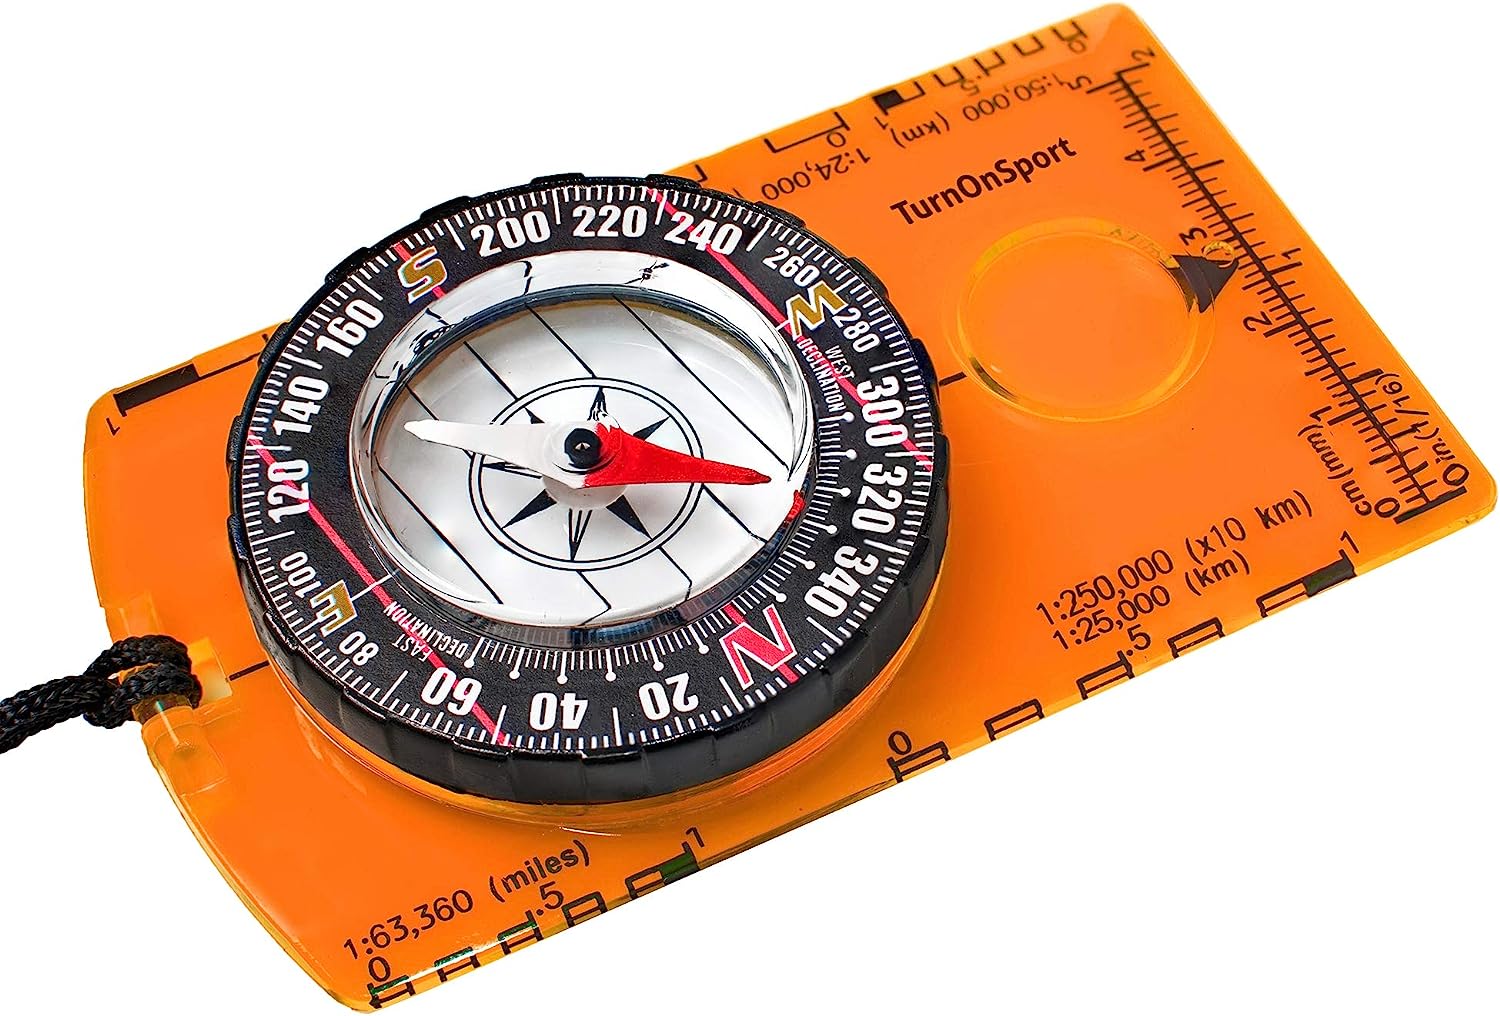 compass for survival product review